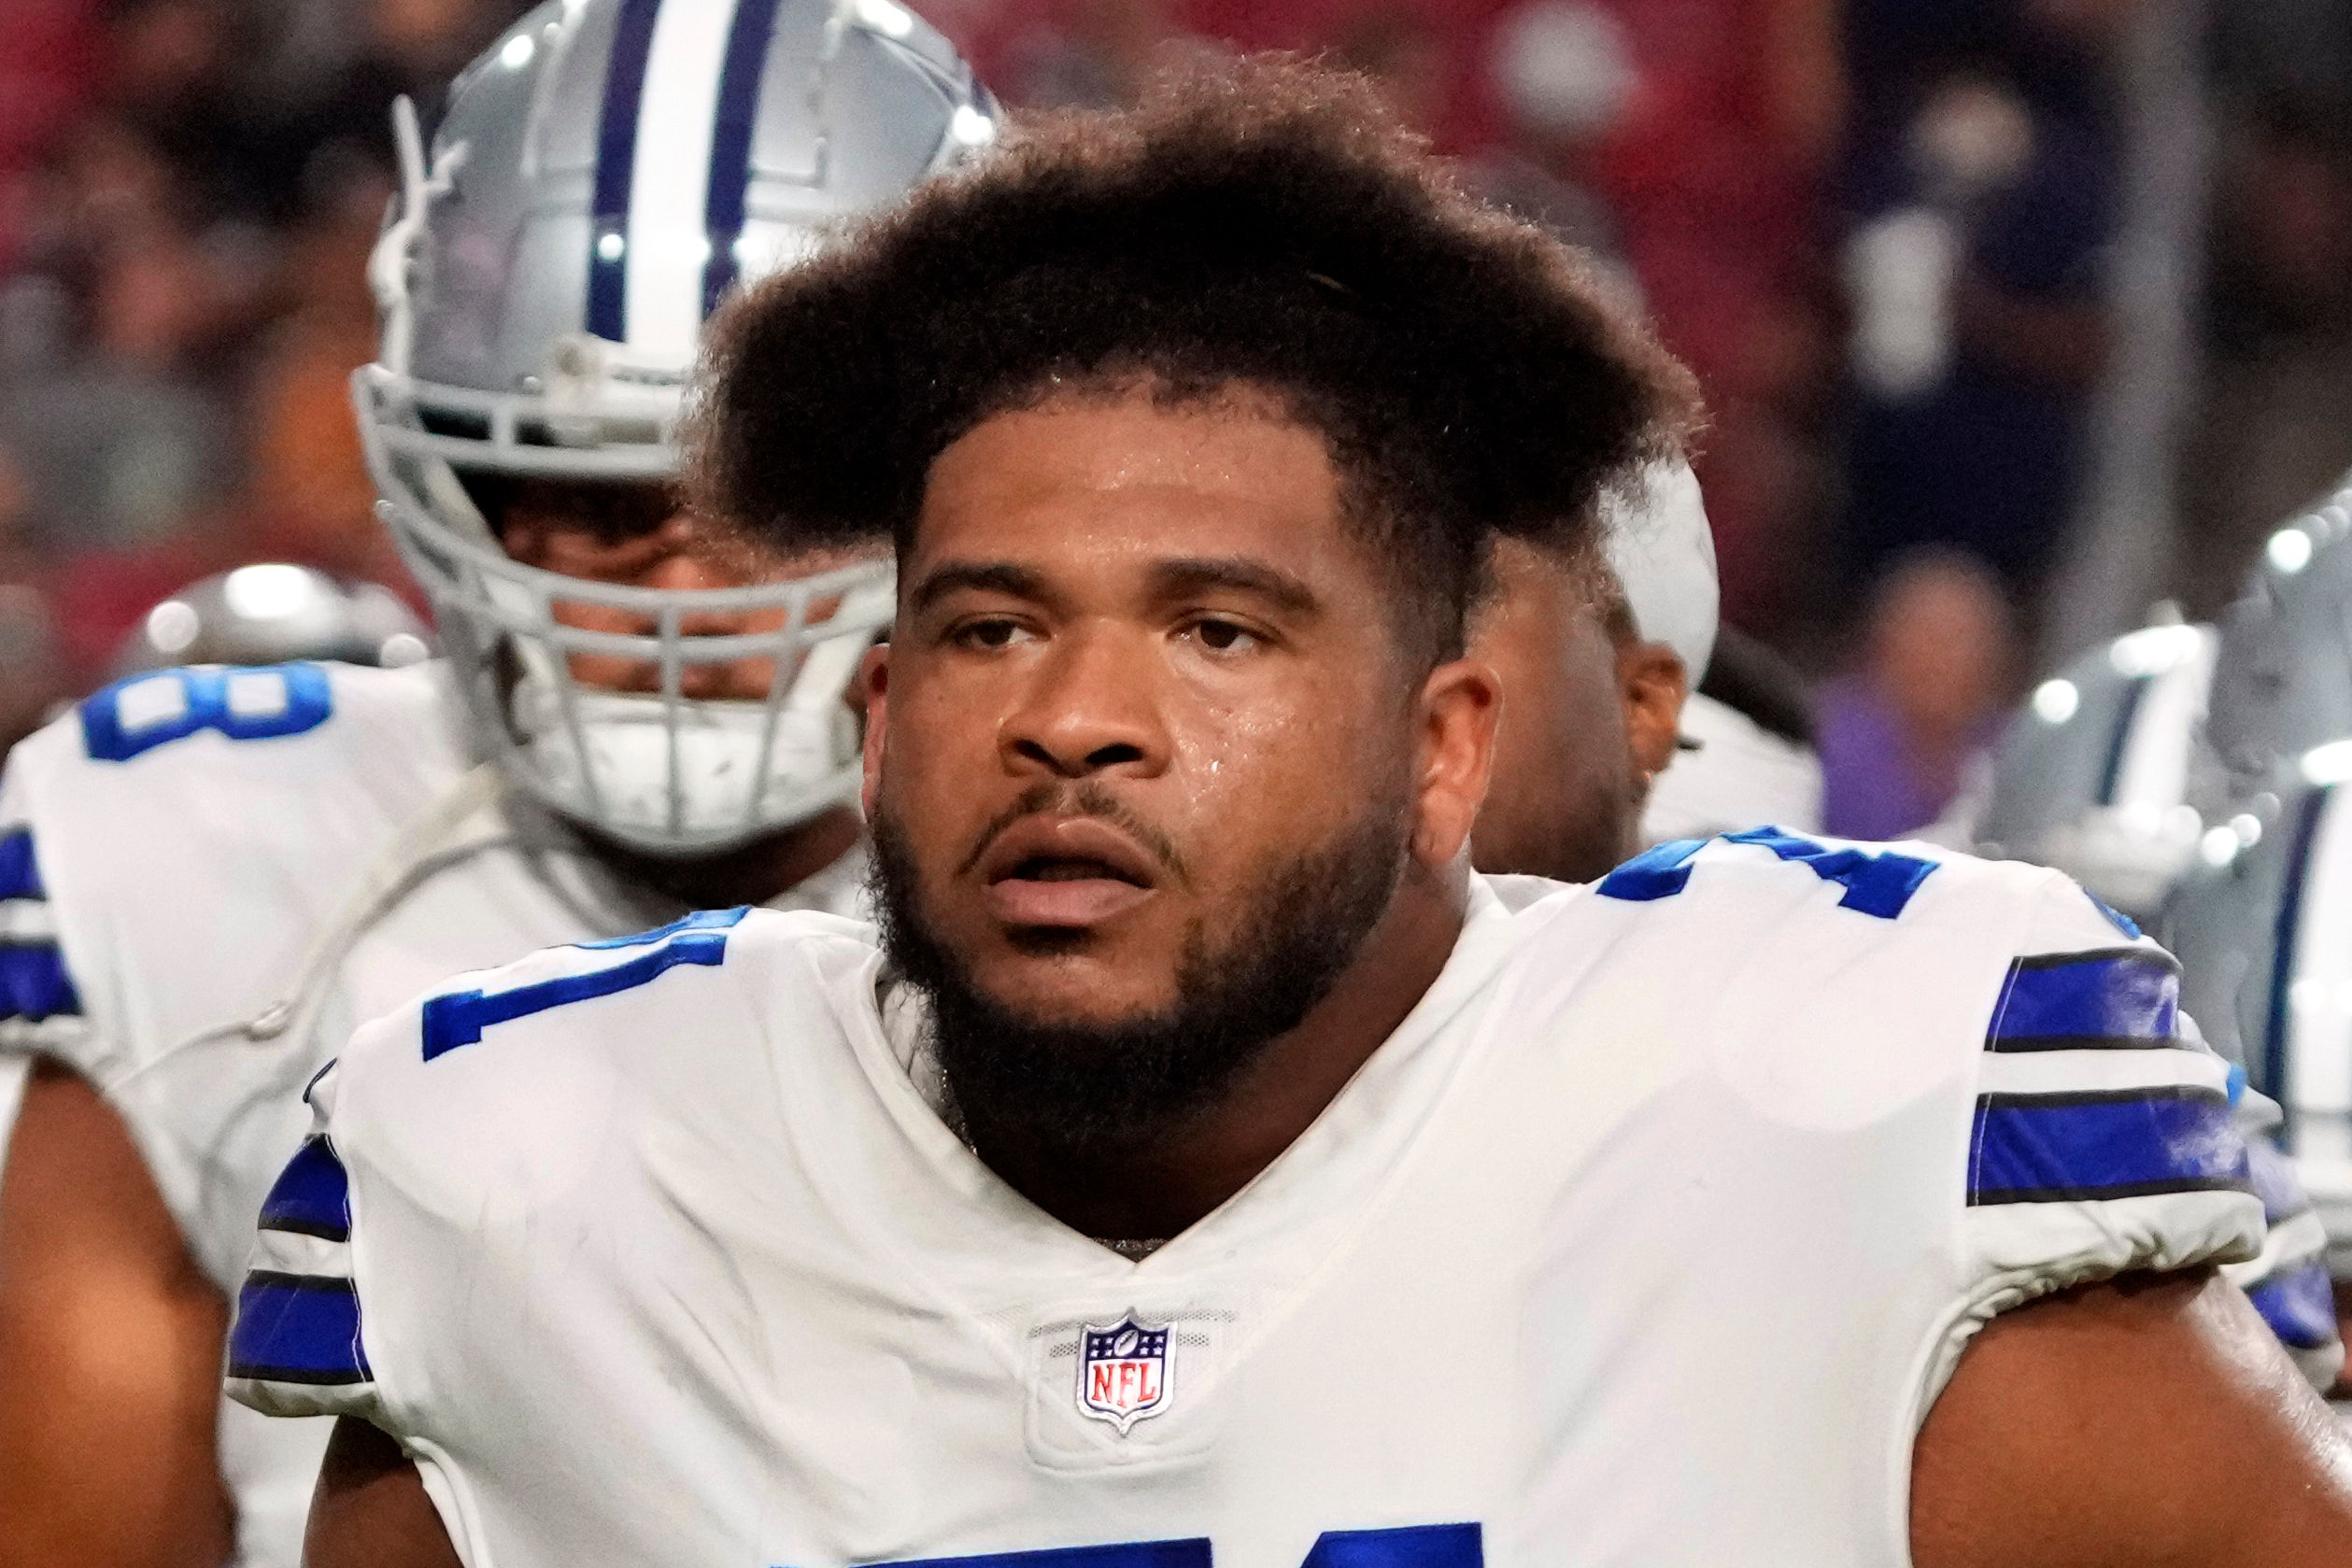 NFL: Cowboys’ Collins suspended for 5 games for violating substance-abuse policy